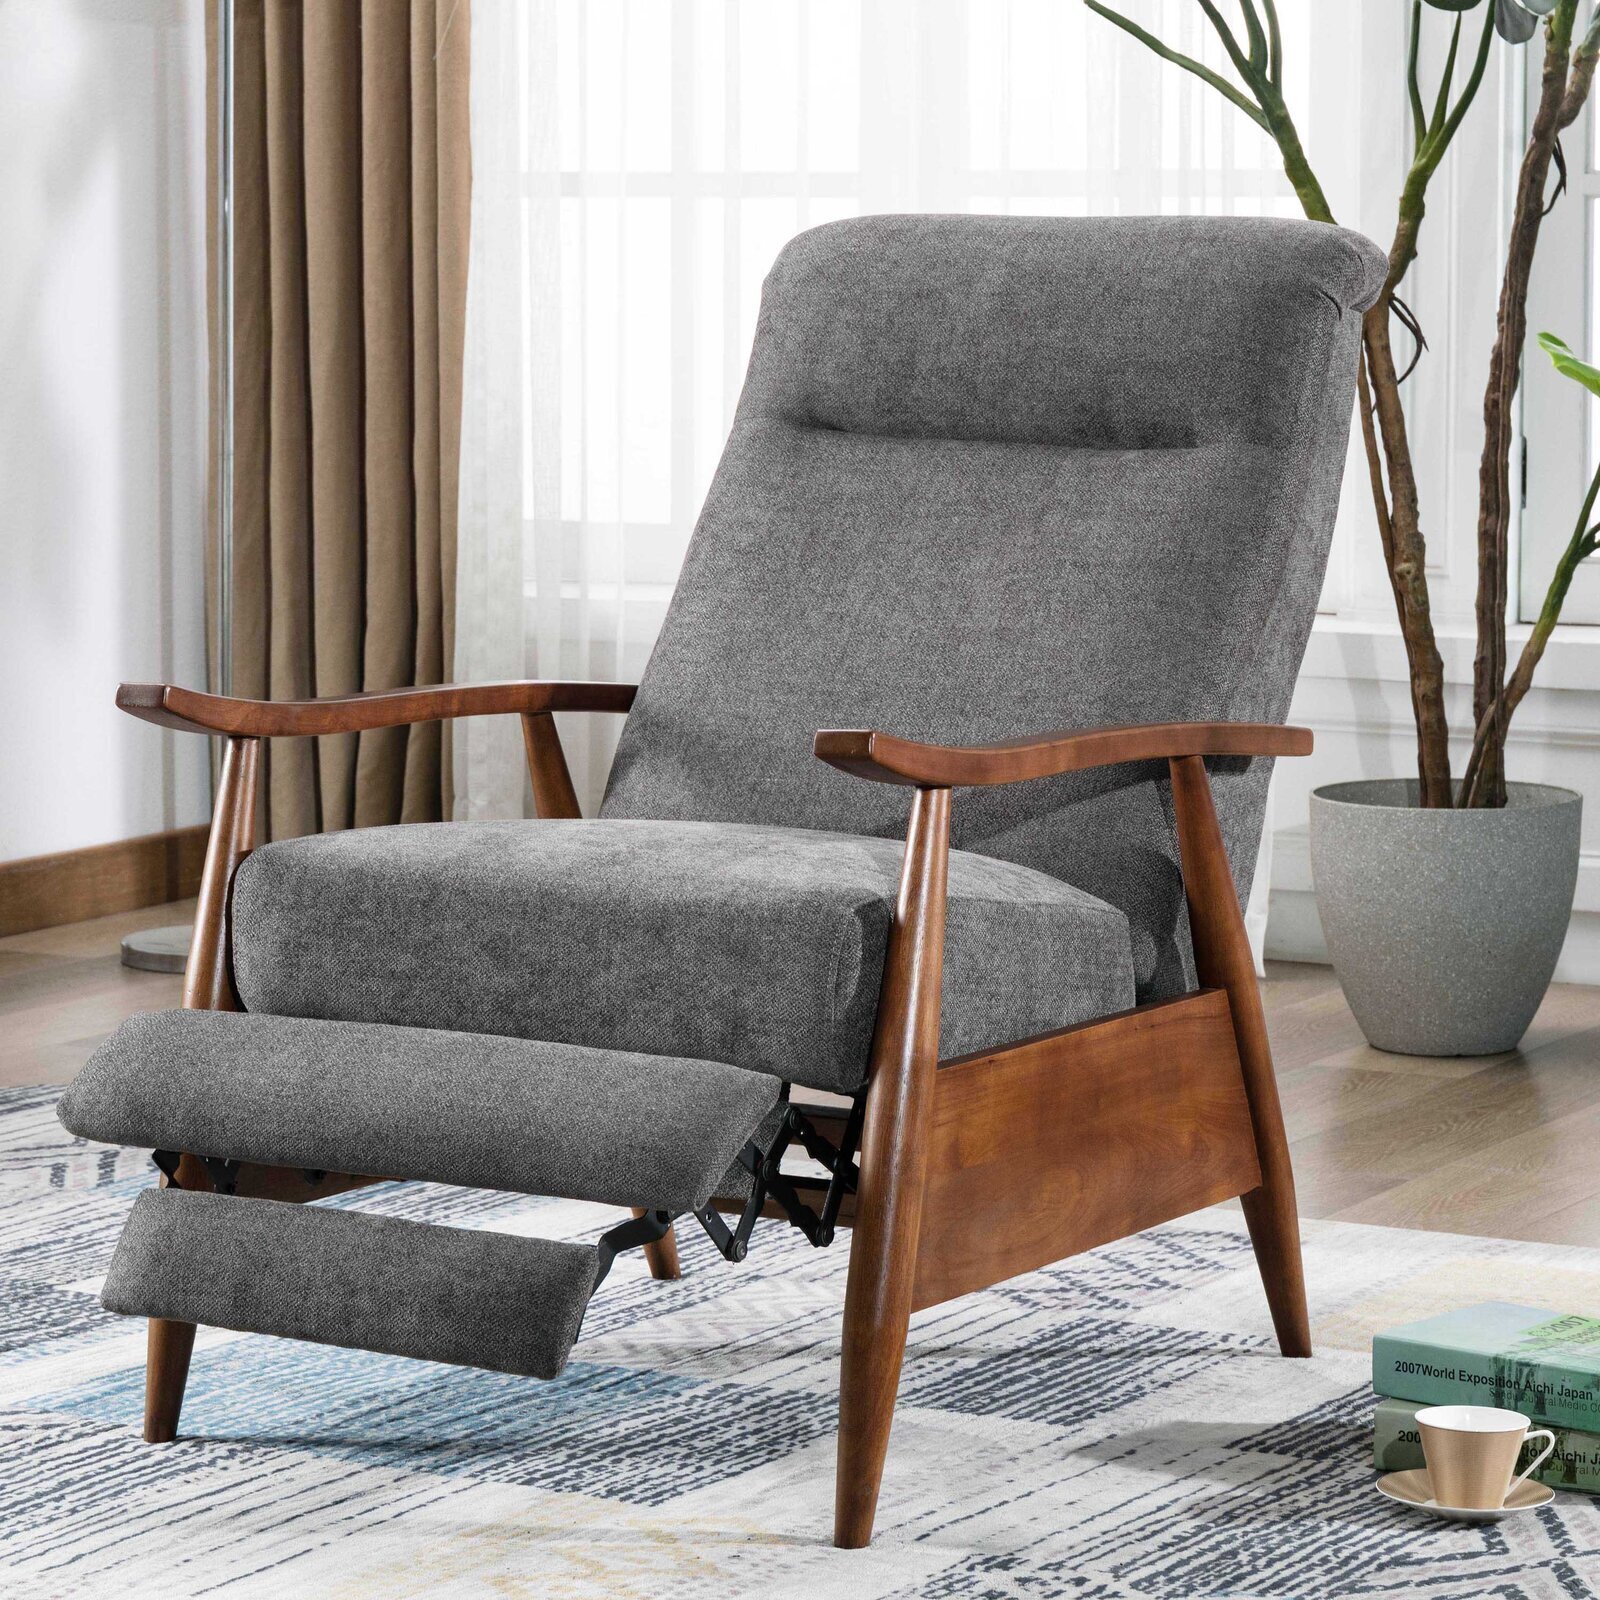 Slim Contemporary Recliner Chair